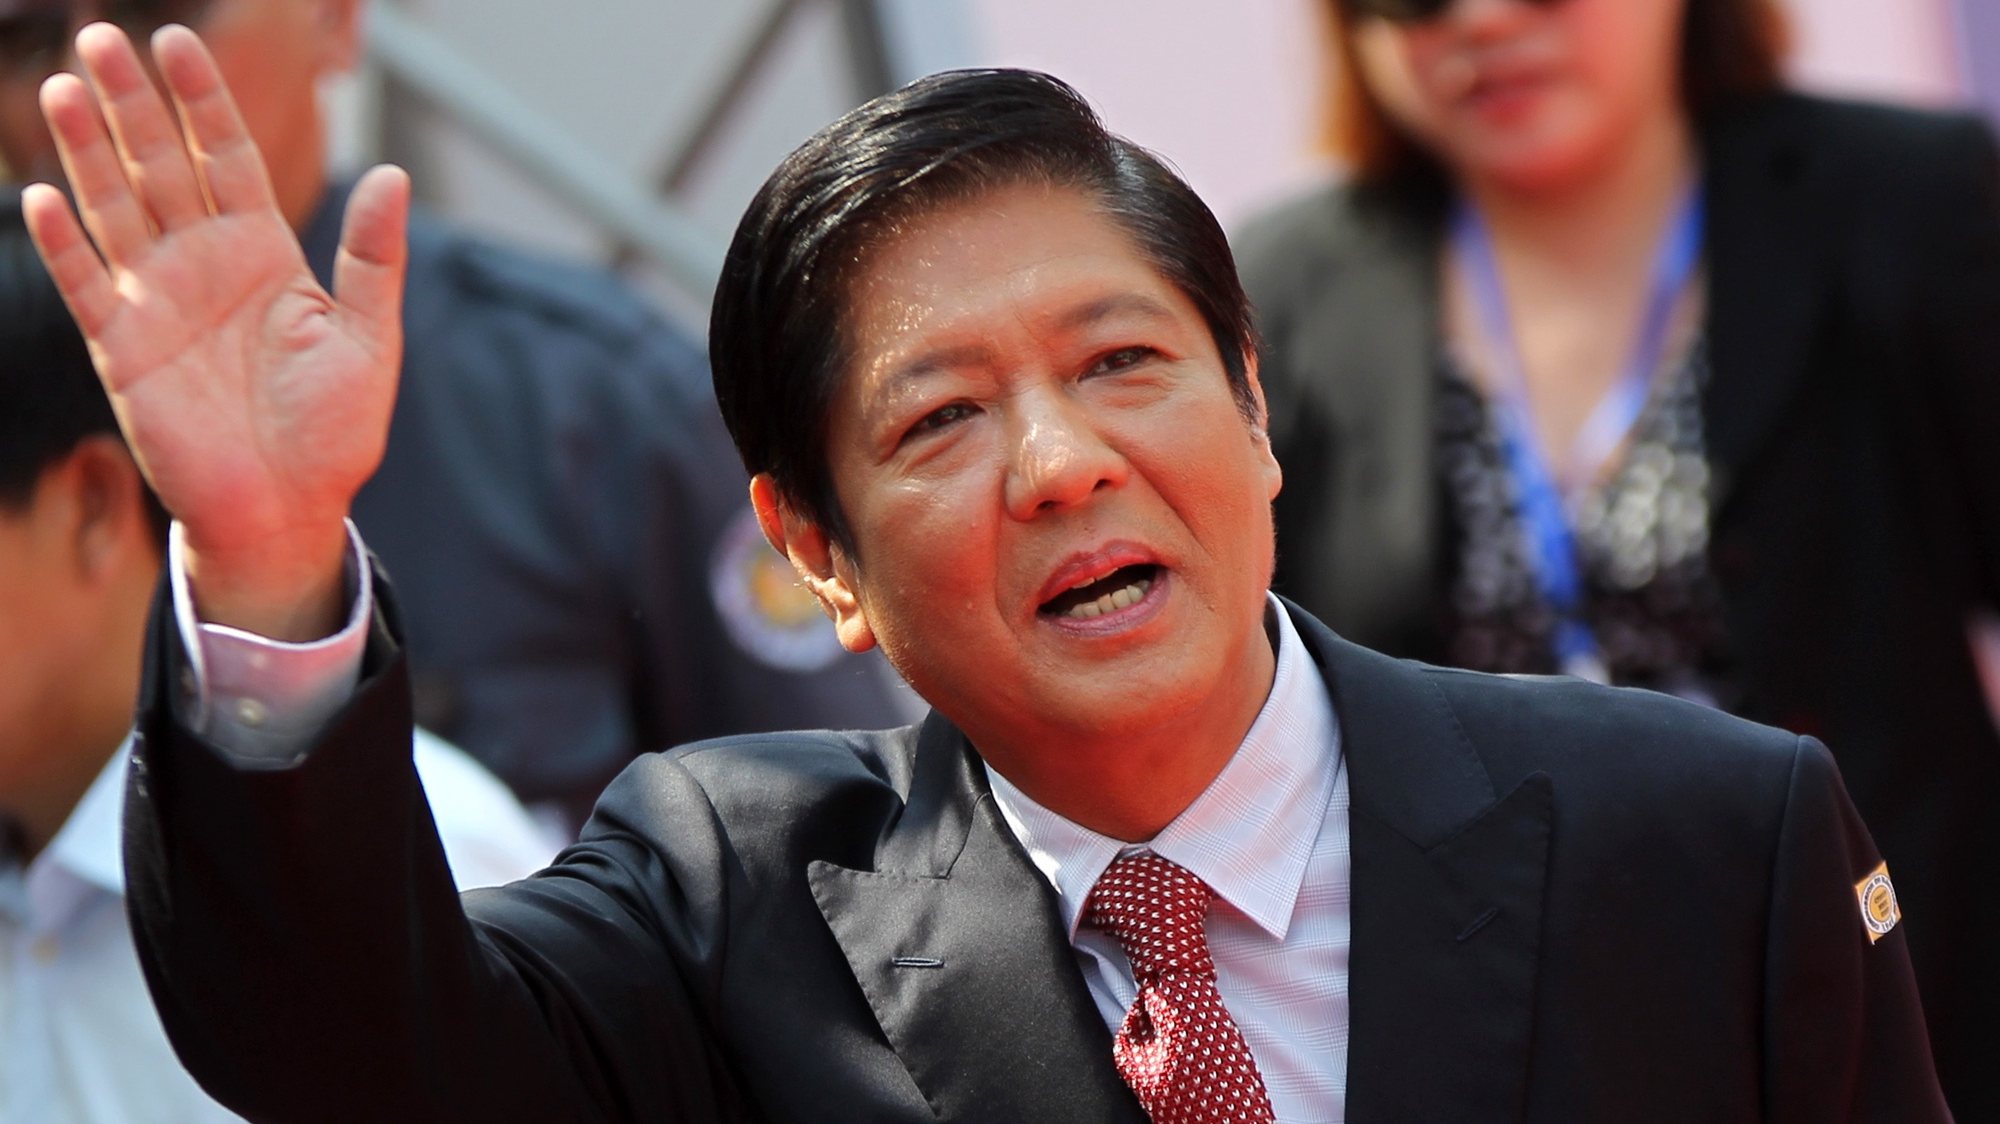 epa07590715 Ferdinand &#039;Bongbong&#039; Marcos Junior (C), son of late dictator Ferdinand Marcos, arrives to attend the proclamation ceremony of his sister, Senator-elect Imee Marcos (not pictured) in Manila, Philippines, 22 May 2019. According to reports, the Commission on Elections (Comelec), sitting as the National Board of Canvassers (NBOC), officially proclaimed all 12 senators-elect, nine days after the 13 May Philippine midterm polls.  EPA/RODEL LUMIARES